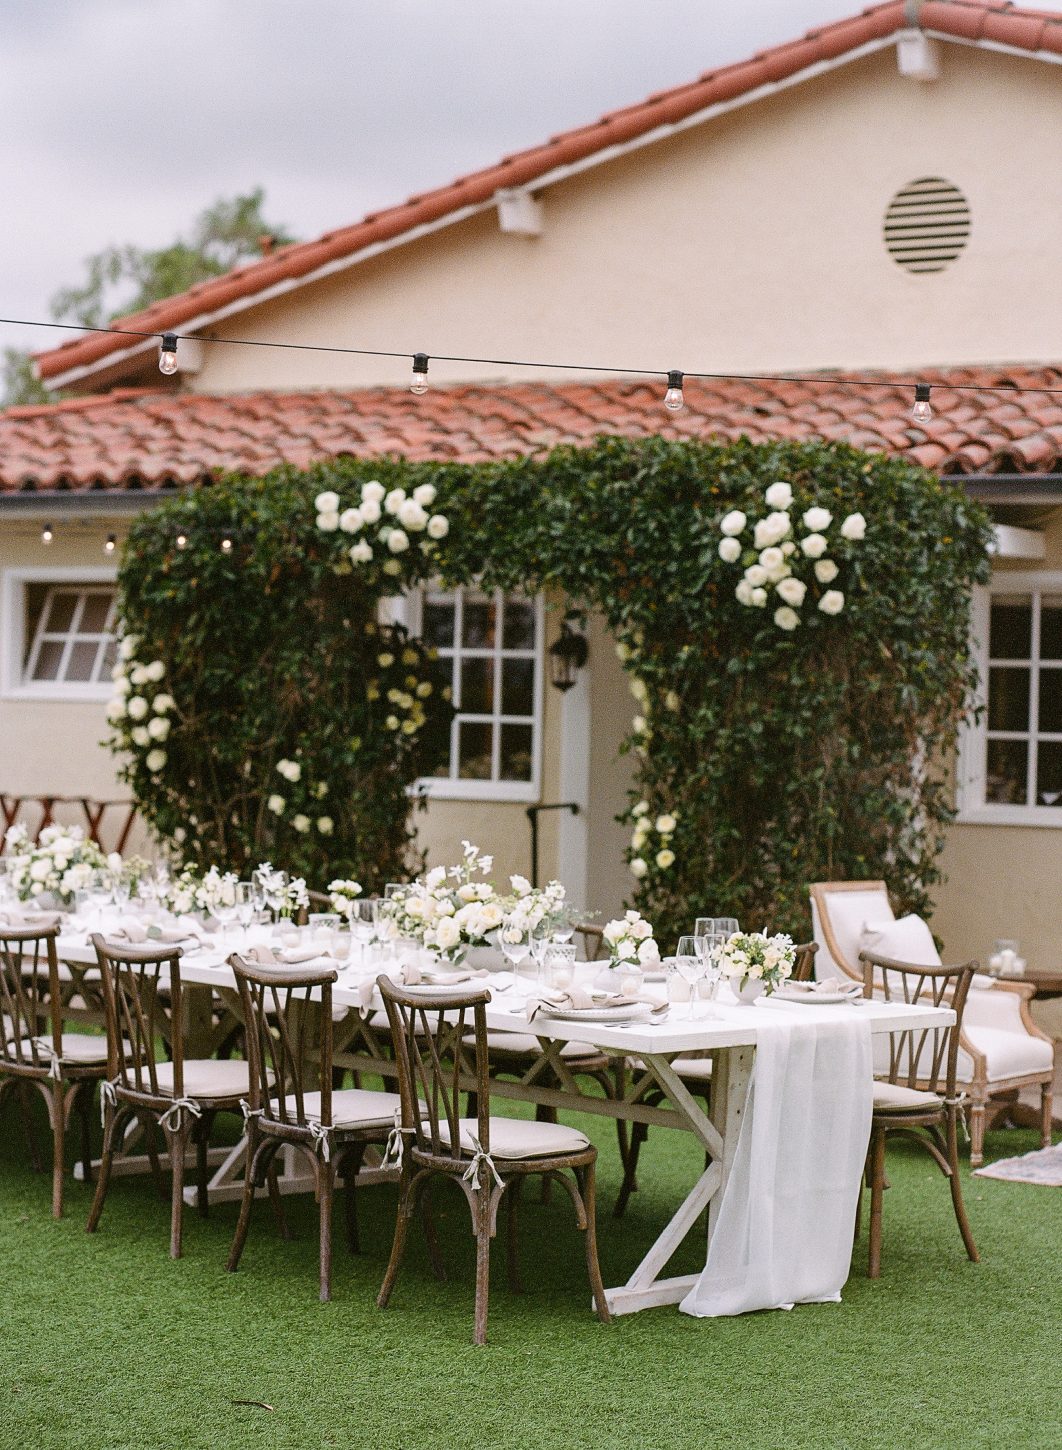 Beautifully decorated wedding table in the hotel garden